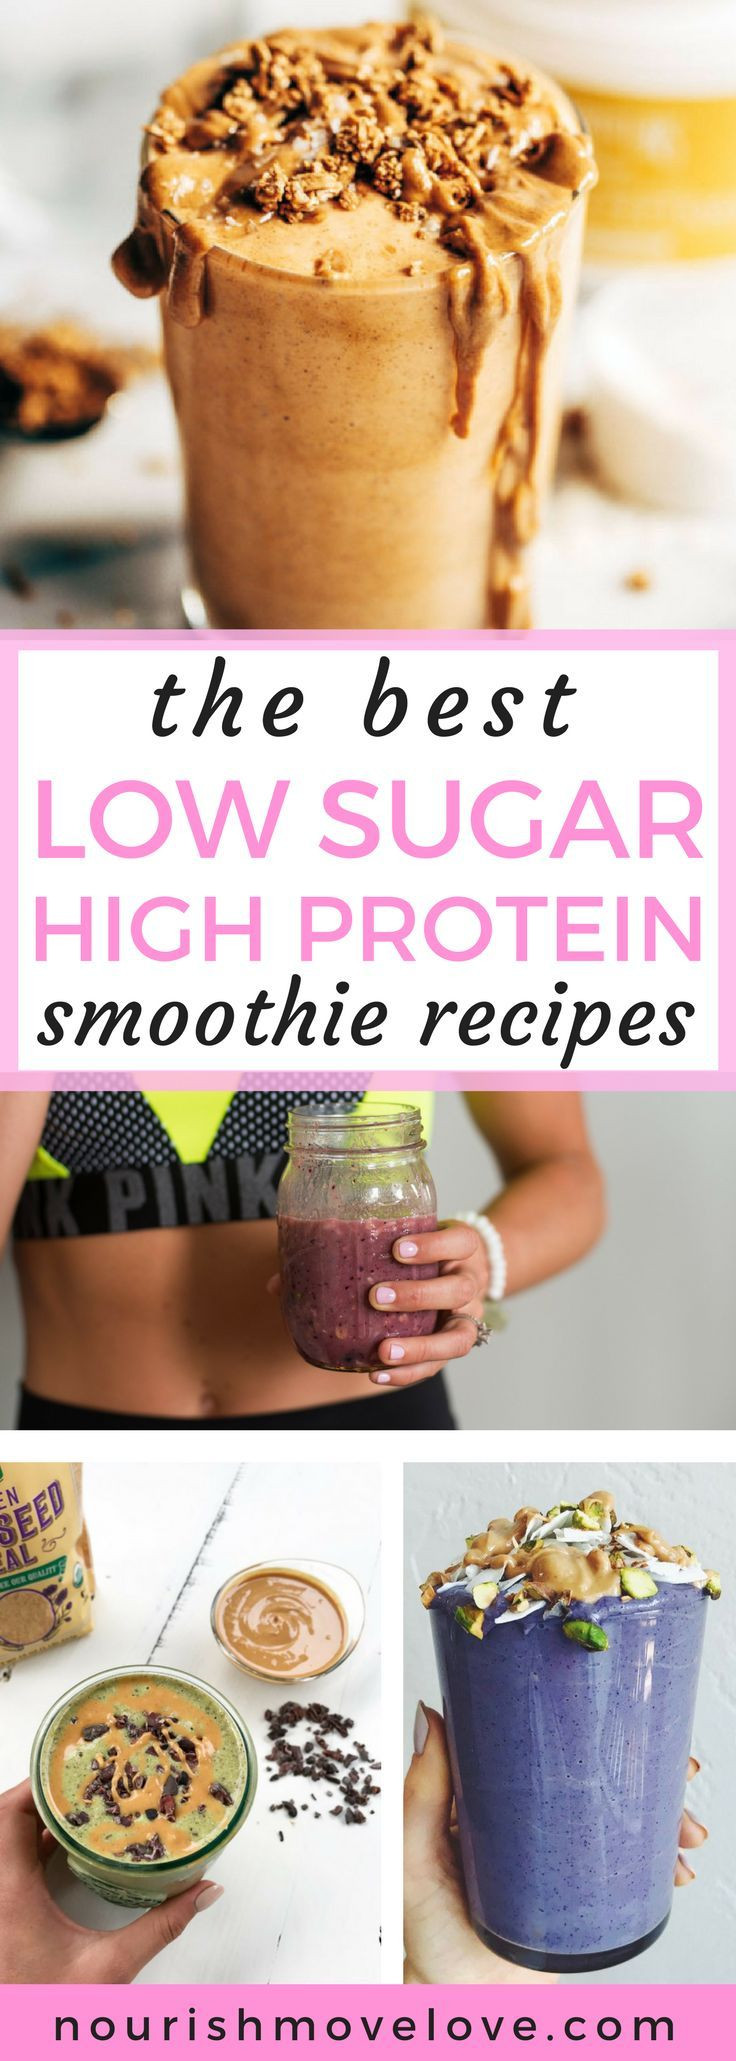 Low Calorie Protein Smoothies
 15 Healthy Low Sugar Smoothie Recipes